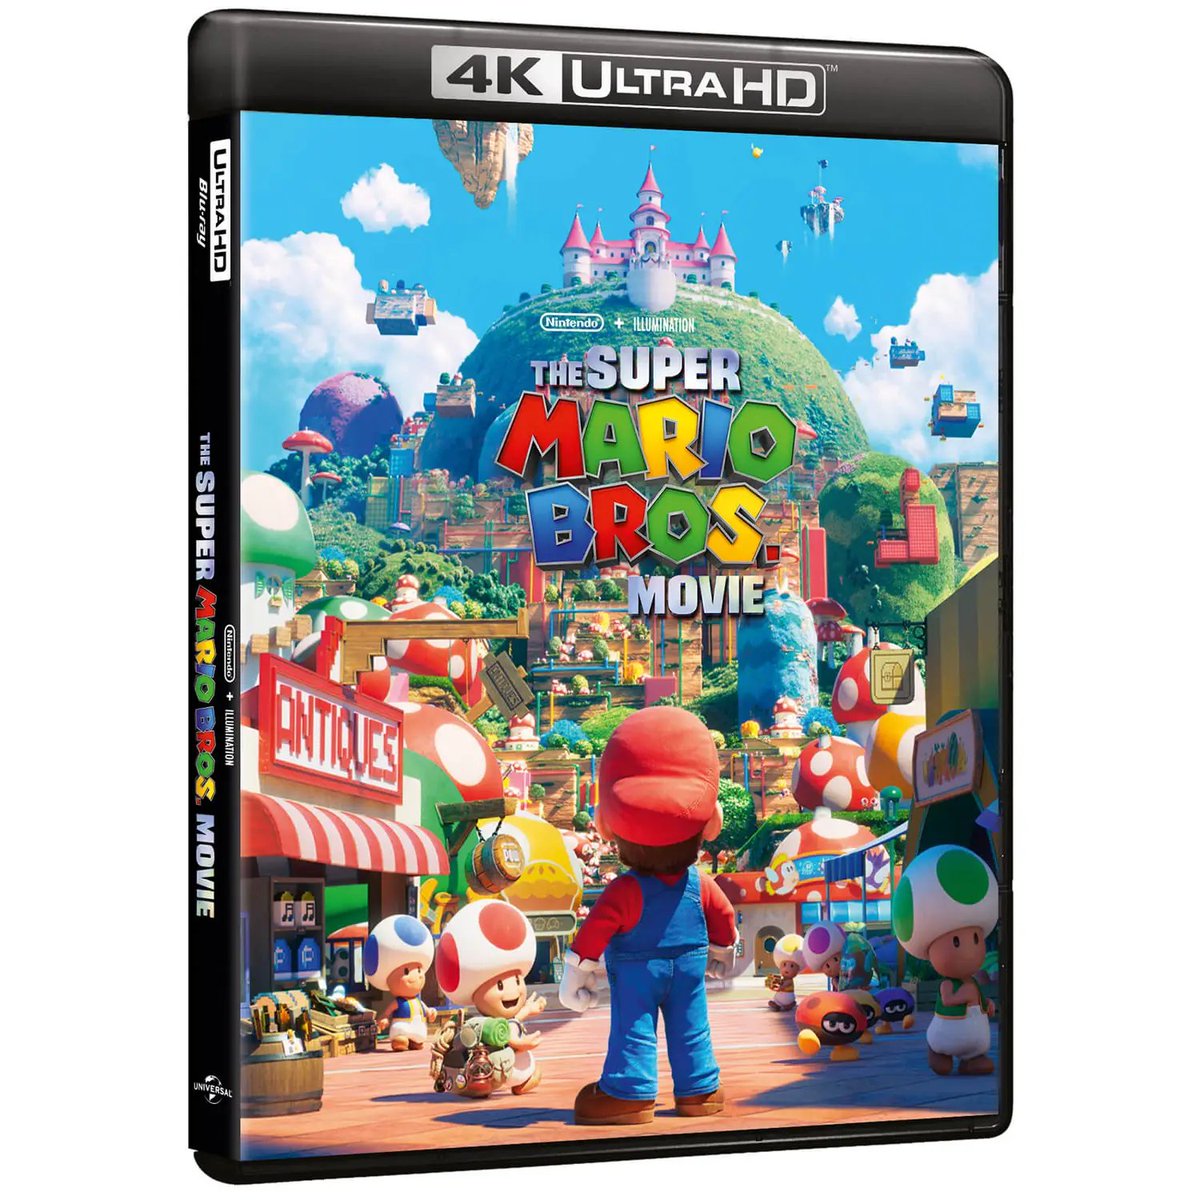 Vuiligheid Bij elkaar passen knuffel Ultra HD Blu-ray 💿 on Twitter: "Probably the first Super Mario Bros. title  that's compatible with Sony PlayStation 5 and Microsoft Xbox Series X but  not with any Nintendo console o_O https://t.co/rPOvOAq7ER